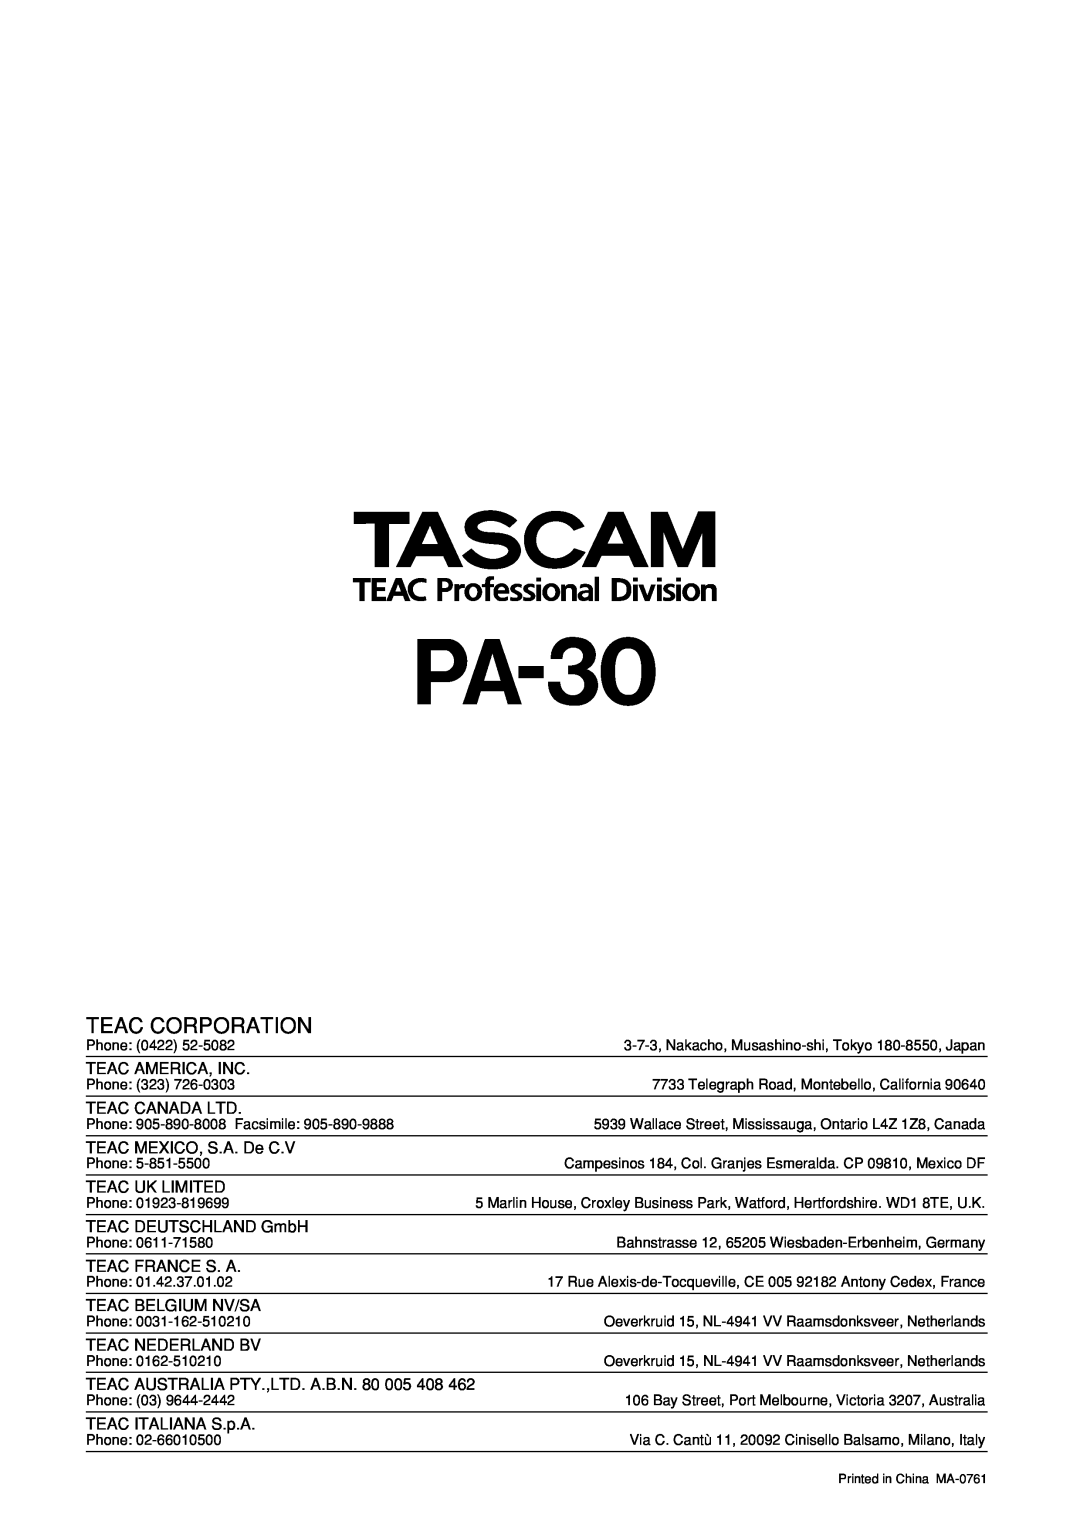 Tascam PA-30 owner manual Teac Corporation 